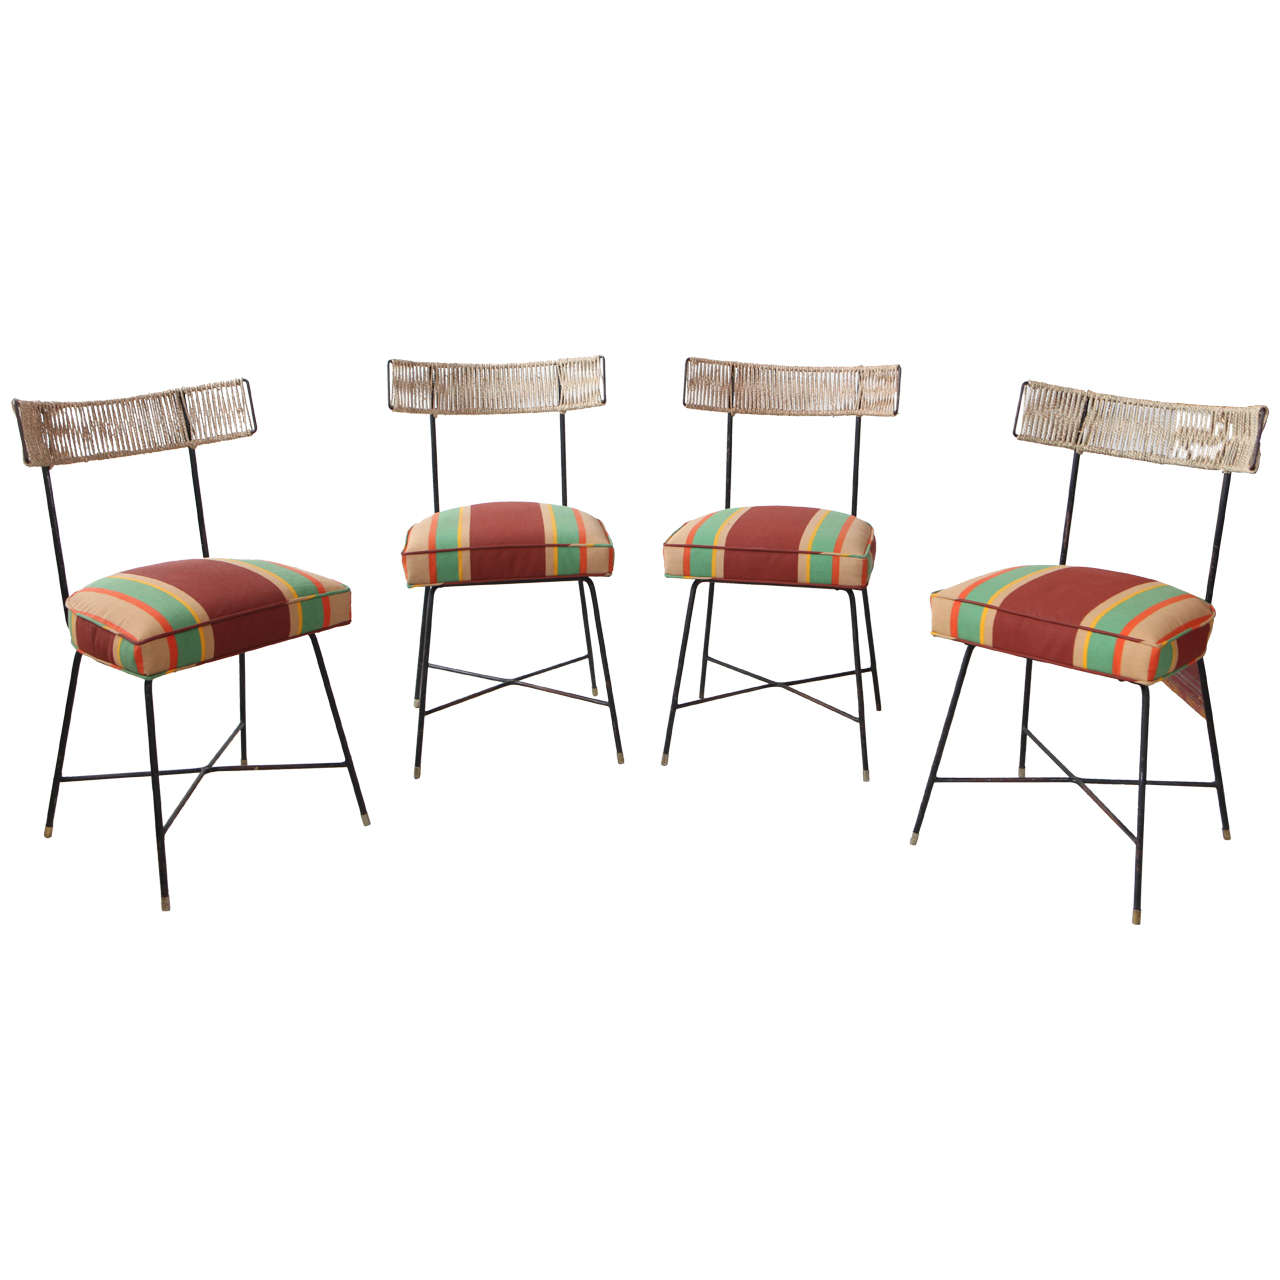 Set of Four Italian Bistro Chairs in Awning Stripe Fabric